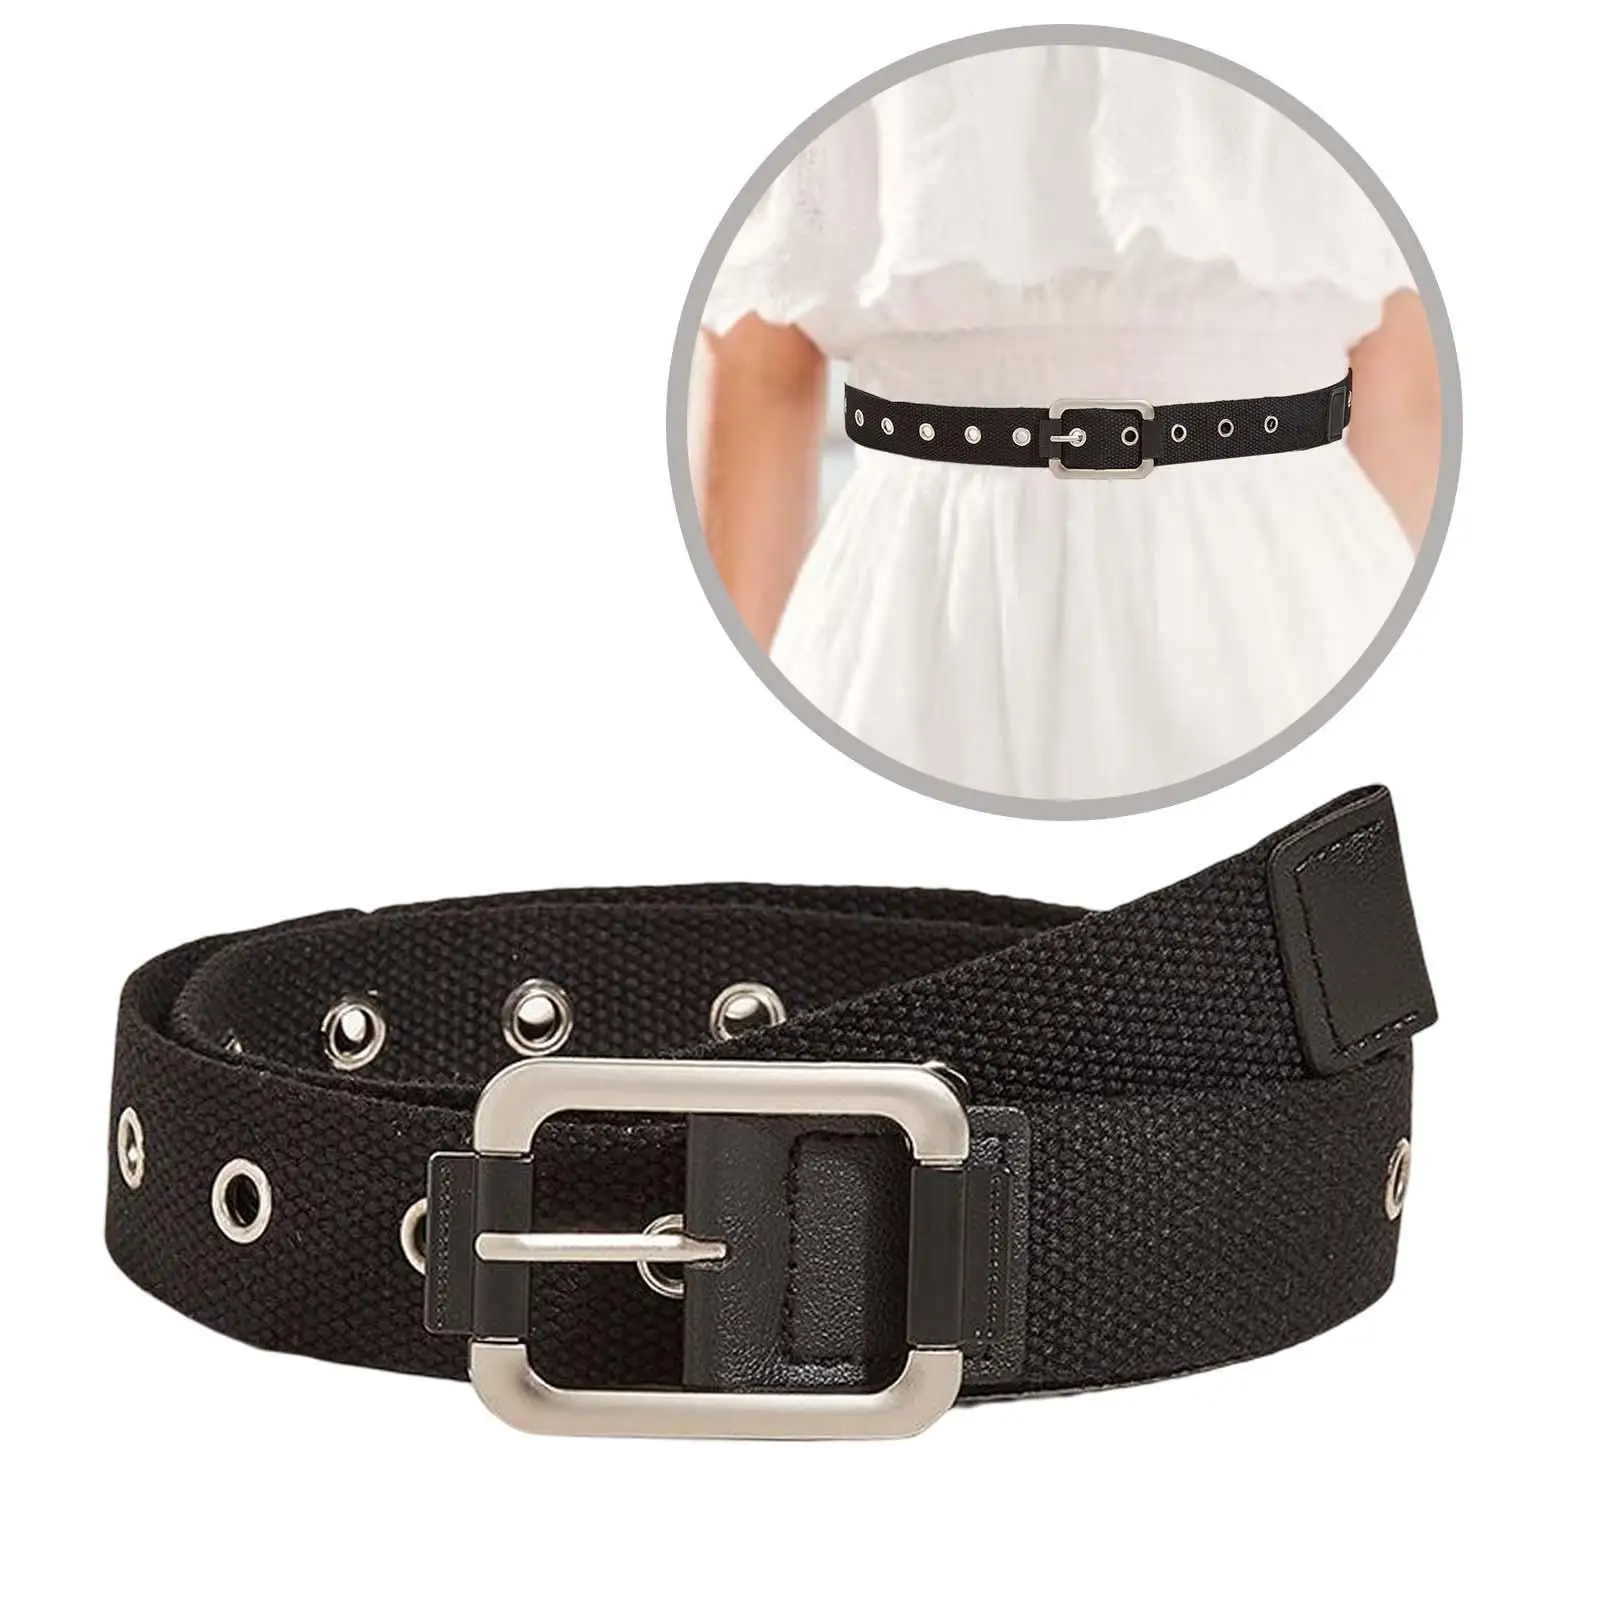 Unisex Waist Belt Casual Single Row Hole Decorative Black Canvas Pin Buckle Belt for Party Sweaters Jackets Street Travel